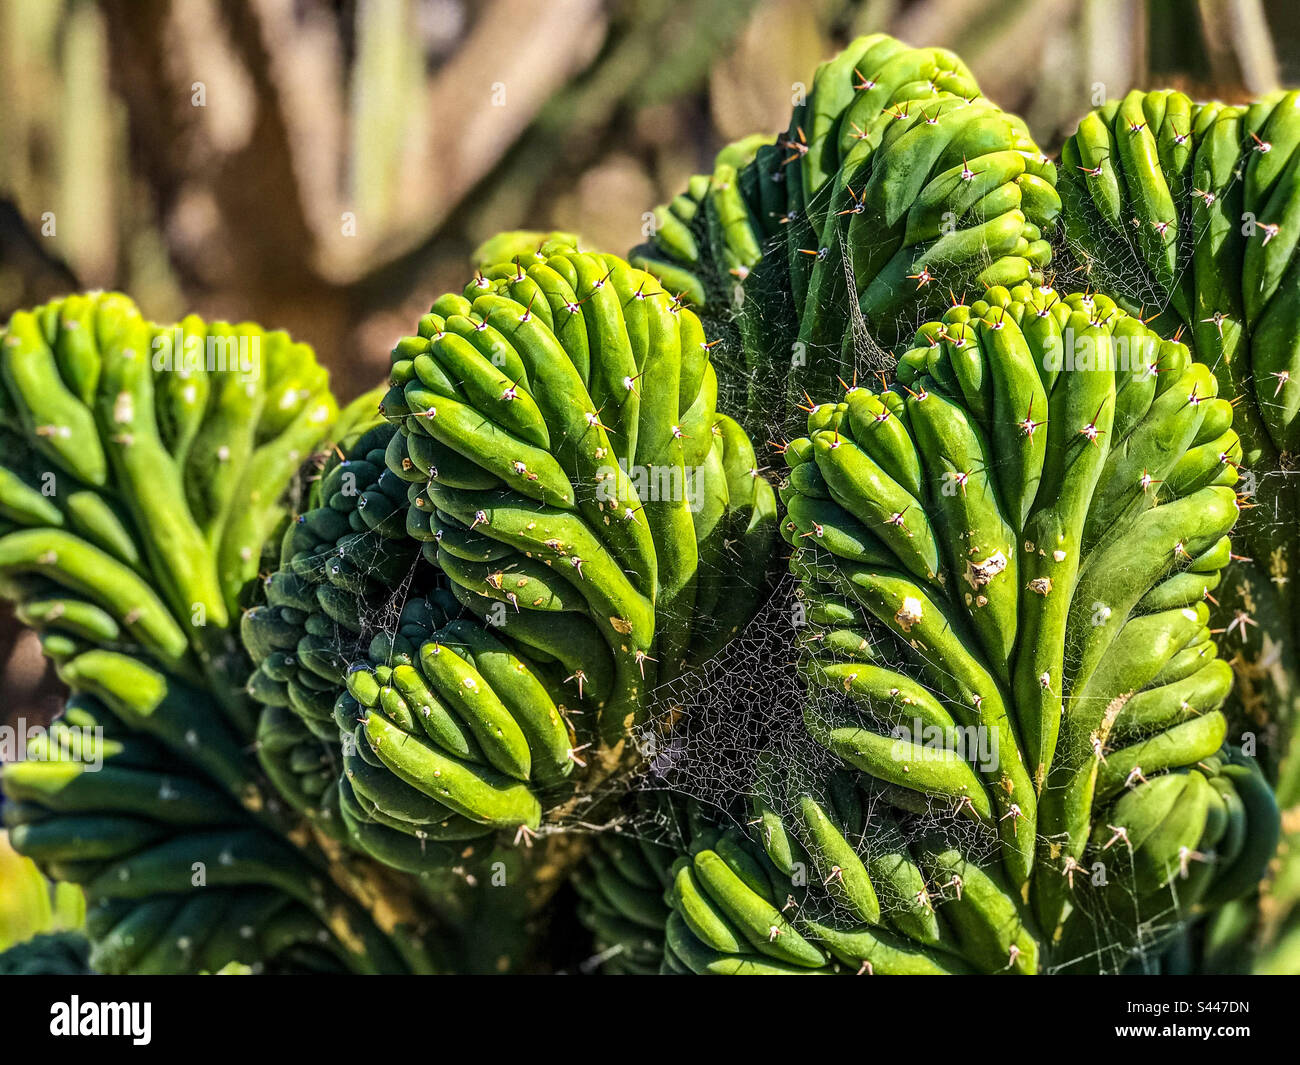 Close-up of dense growth of Myrtillocactus geometrizans stems growing closely together with several spider webs on cacti. Columnar candelabra like tree cactus. Focus on foreground. Stock Photo